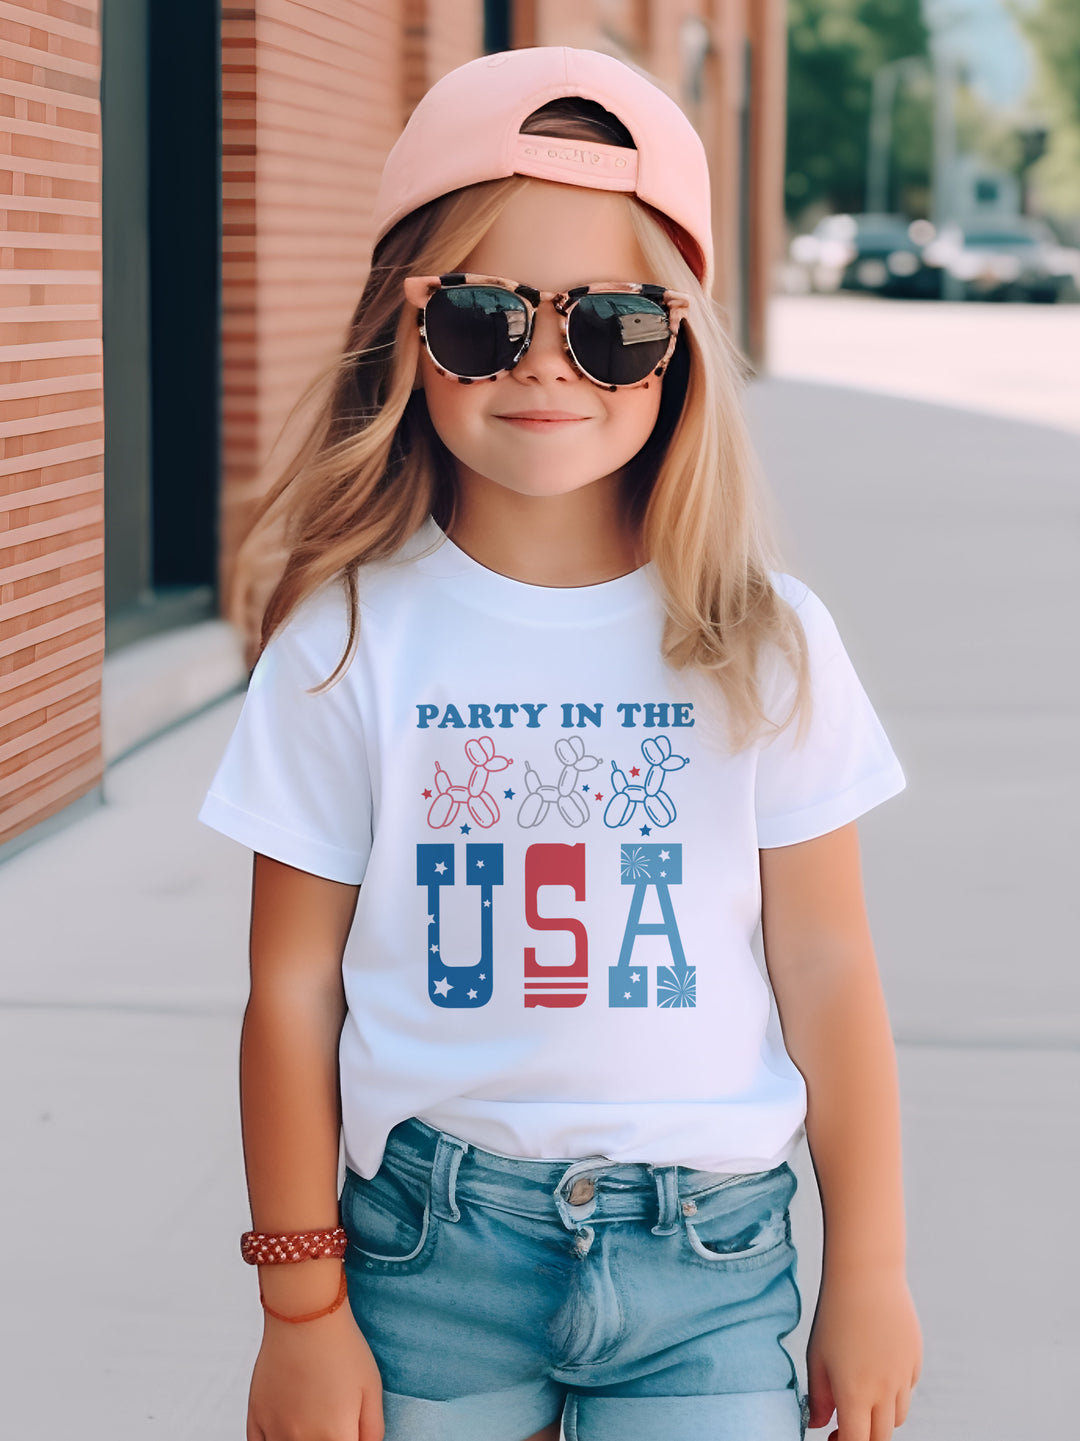 Party In The USA Kids Graphic Tee